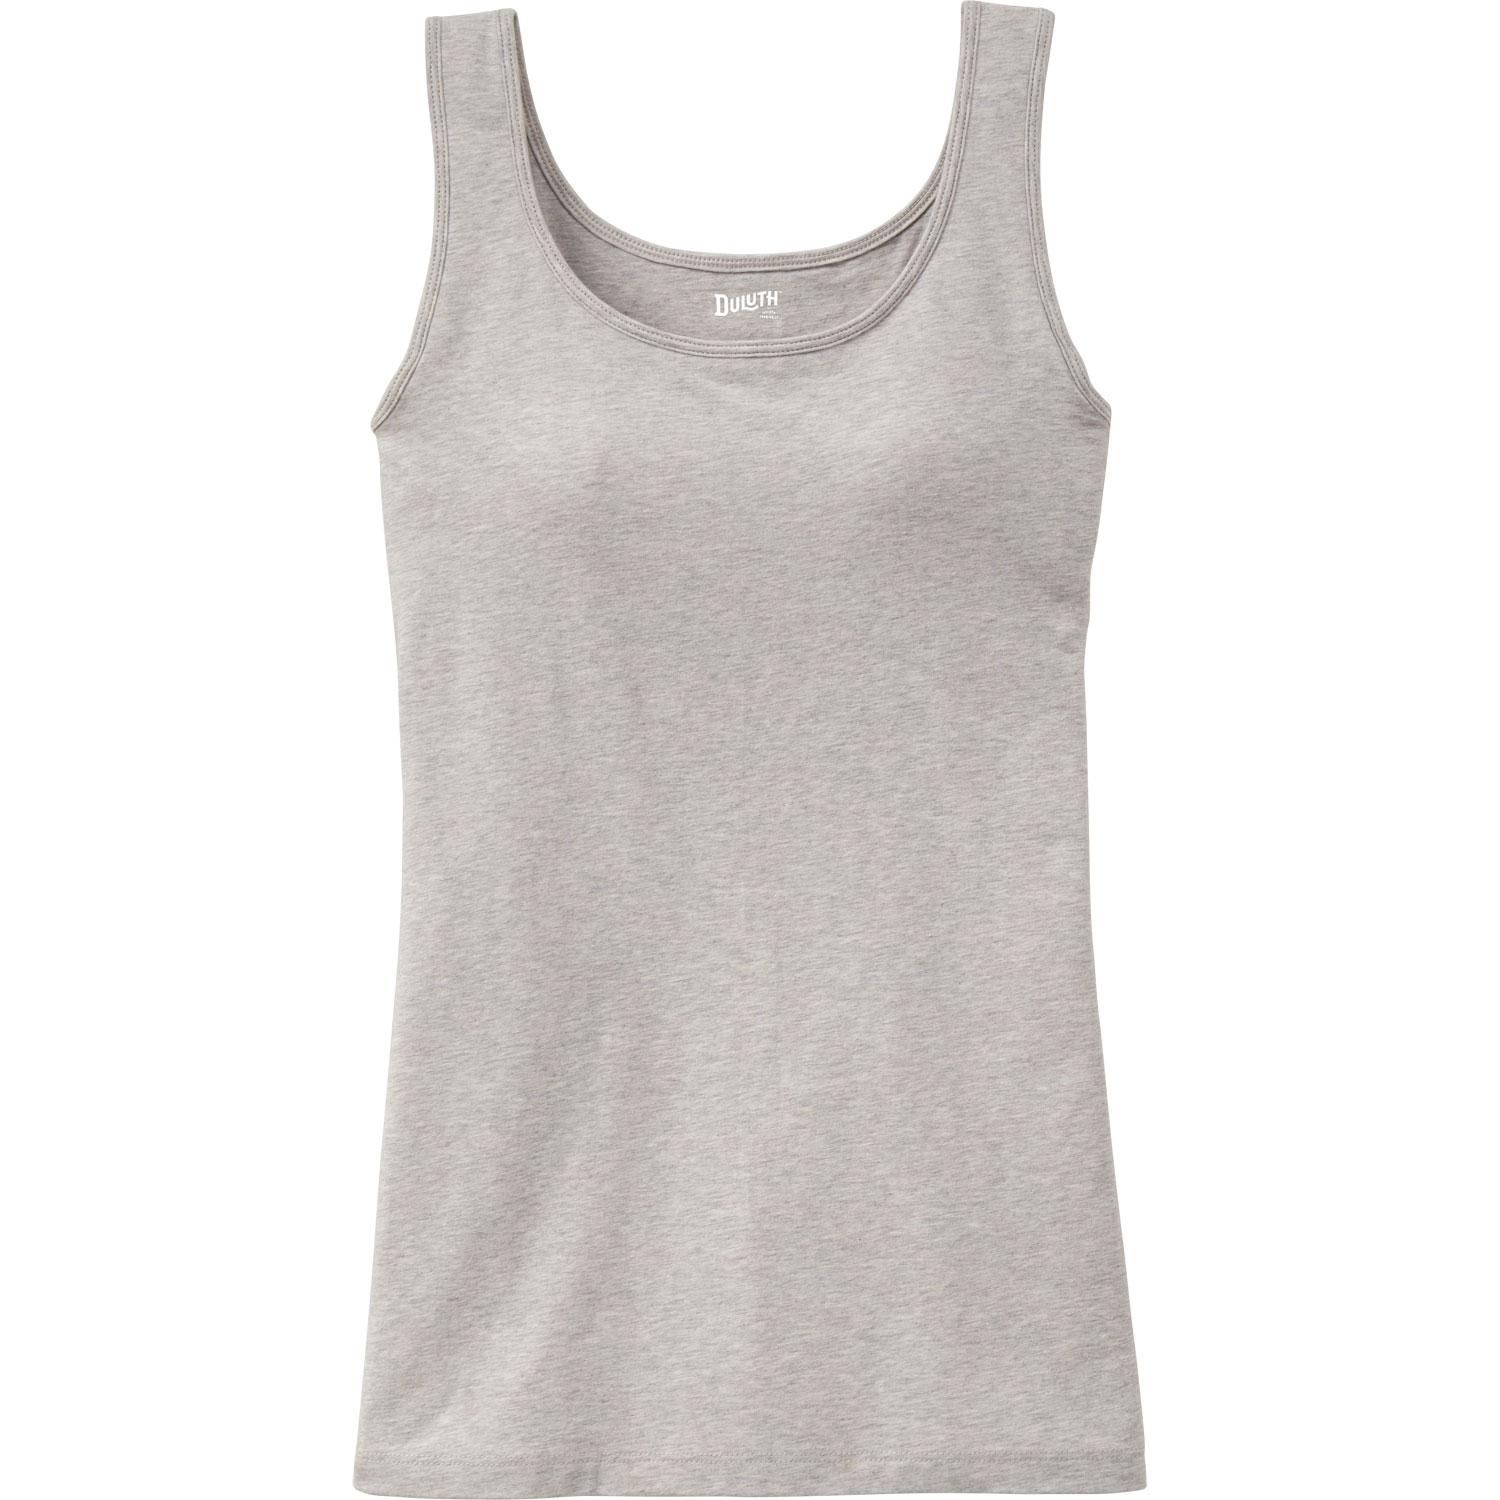 34DDD-Cup Shoppers Don't Need to Wear a Bra With These Supportive Tank  Tops That Are $5 Apiece